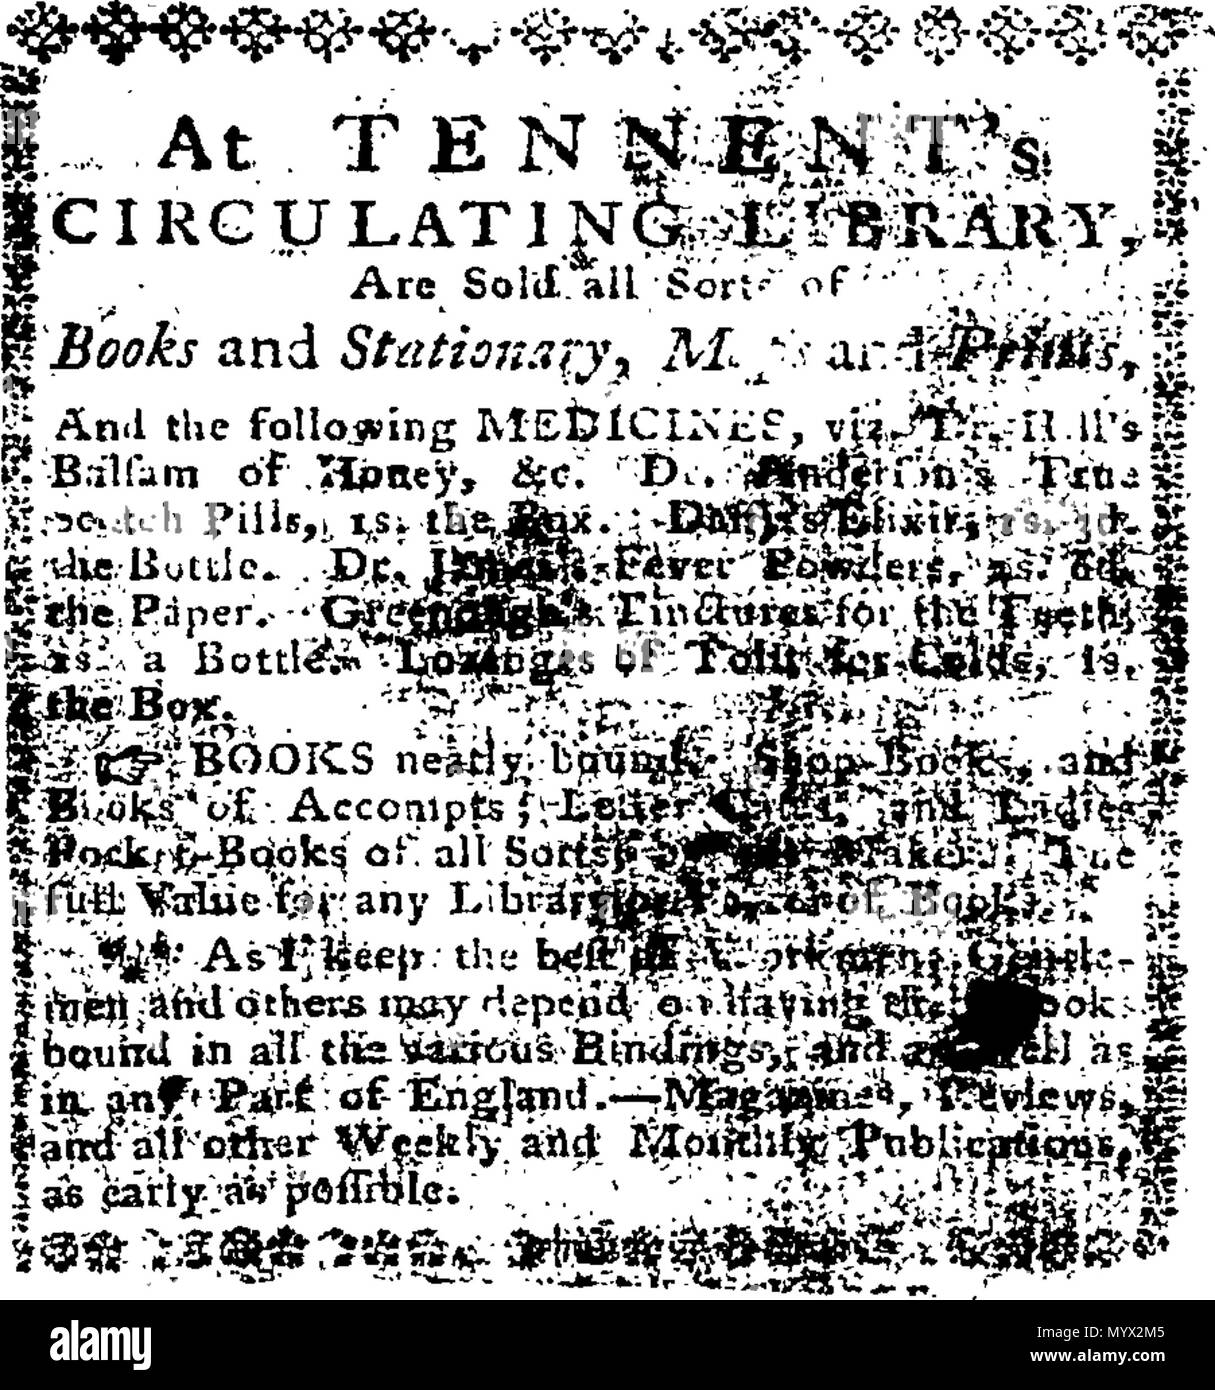 . English: Fleuron from book: At [Te]nnent's circulating-library, Top of Milsom-Street, Bath, Are sold all Sorts of Books & Stationary, Maps & Prints, And the following Medicines, viz. Dr. Hill's Balsam of Honey, &c. Dr. Anderson's true Scotch Pills, 1s. Daffy's Elixir, 1s. 3d. Dr. James's Powders, 2s 6d. His analeptic Pills, 4s. Greenough's Tinctures for the Teeth, 1s a Bottle, Lozenges of Tolu for Colds, 1s. Godfrey's General Cordial, 6d. Friar's Balsam, 1s. Bateman's Pectoral Drops, 1s. Ladies black Sticking Plaister, 6d. Arquebusade Water, &c. - Books neatly bound. - Account-Books of all S Stock Photo